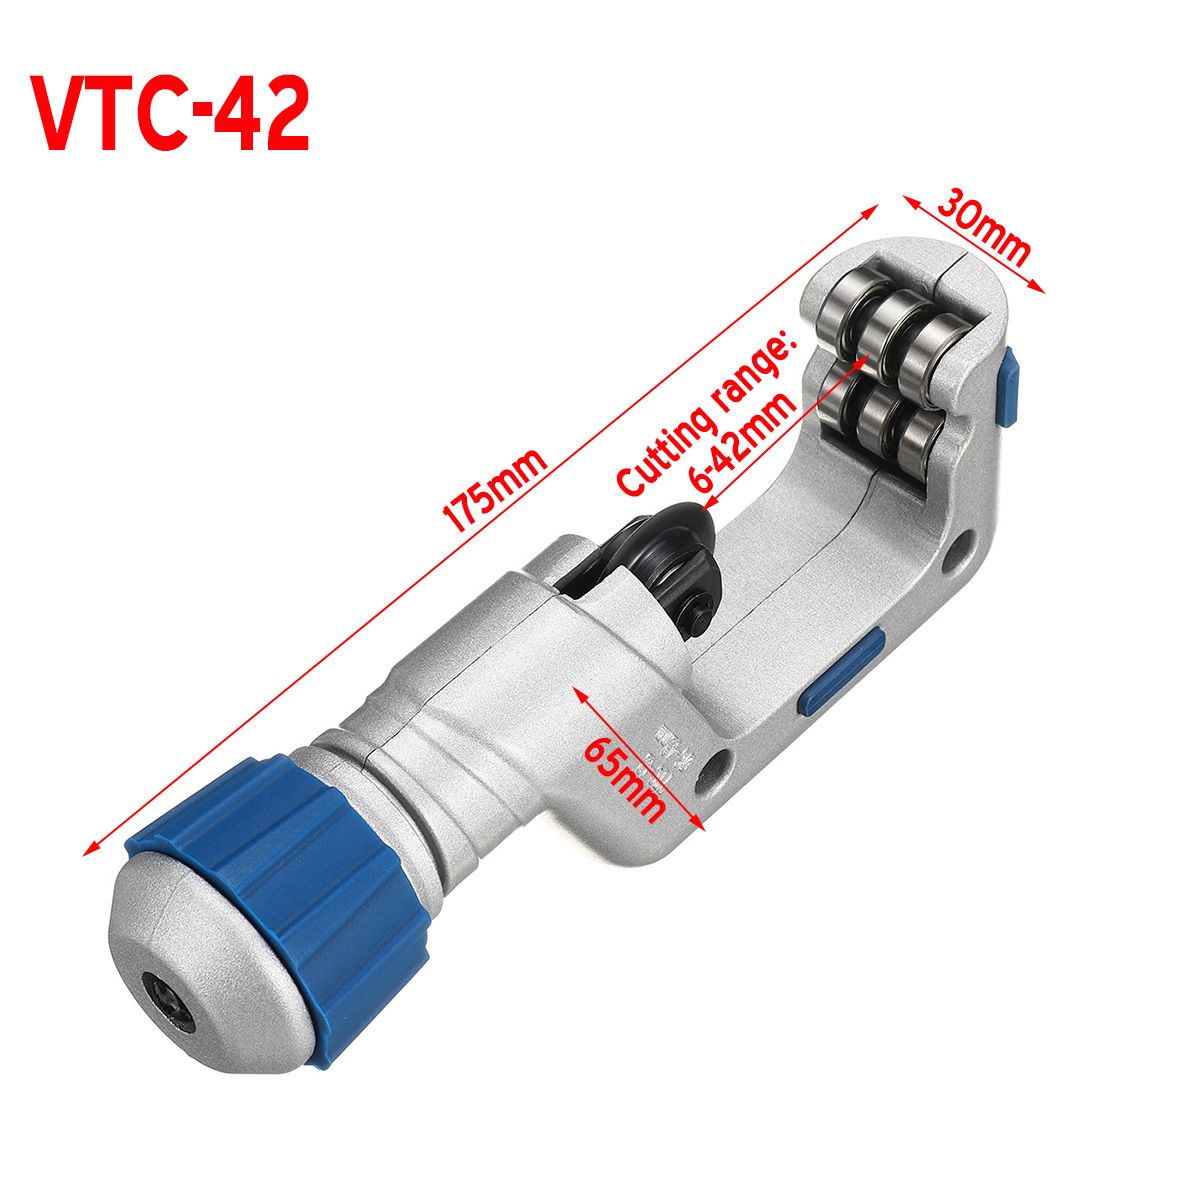 Roller-Tube-Cutter-4-32mm6-42mm-Pipe-Cutter-Ball-Bearing-Cutting-Blade-For-Copper-Aluminum-Stainless-1617909